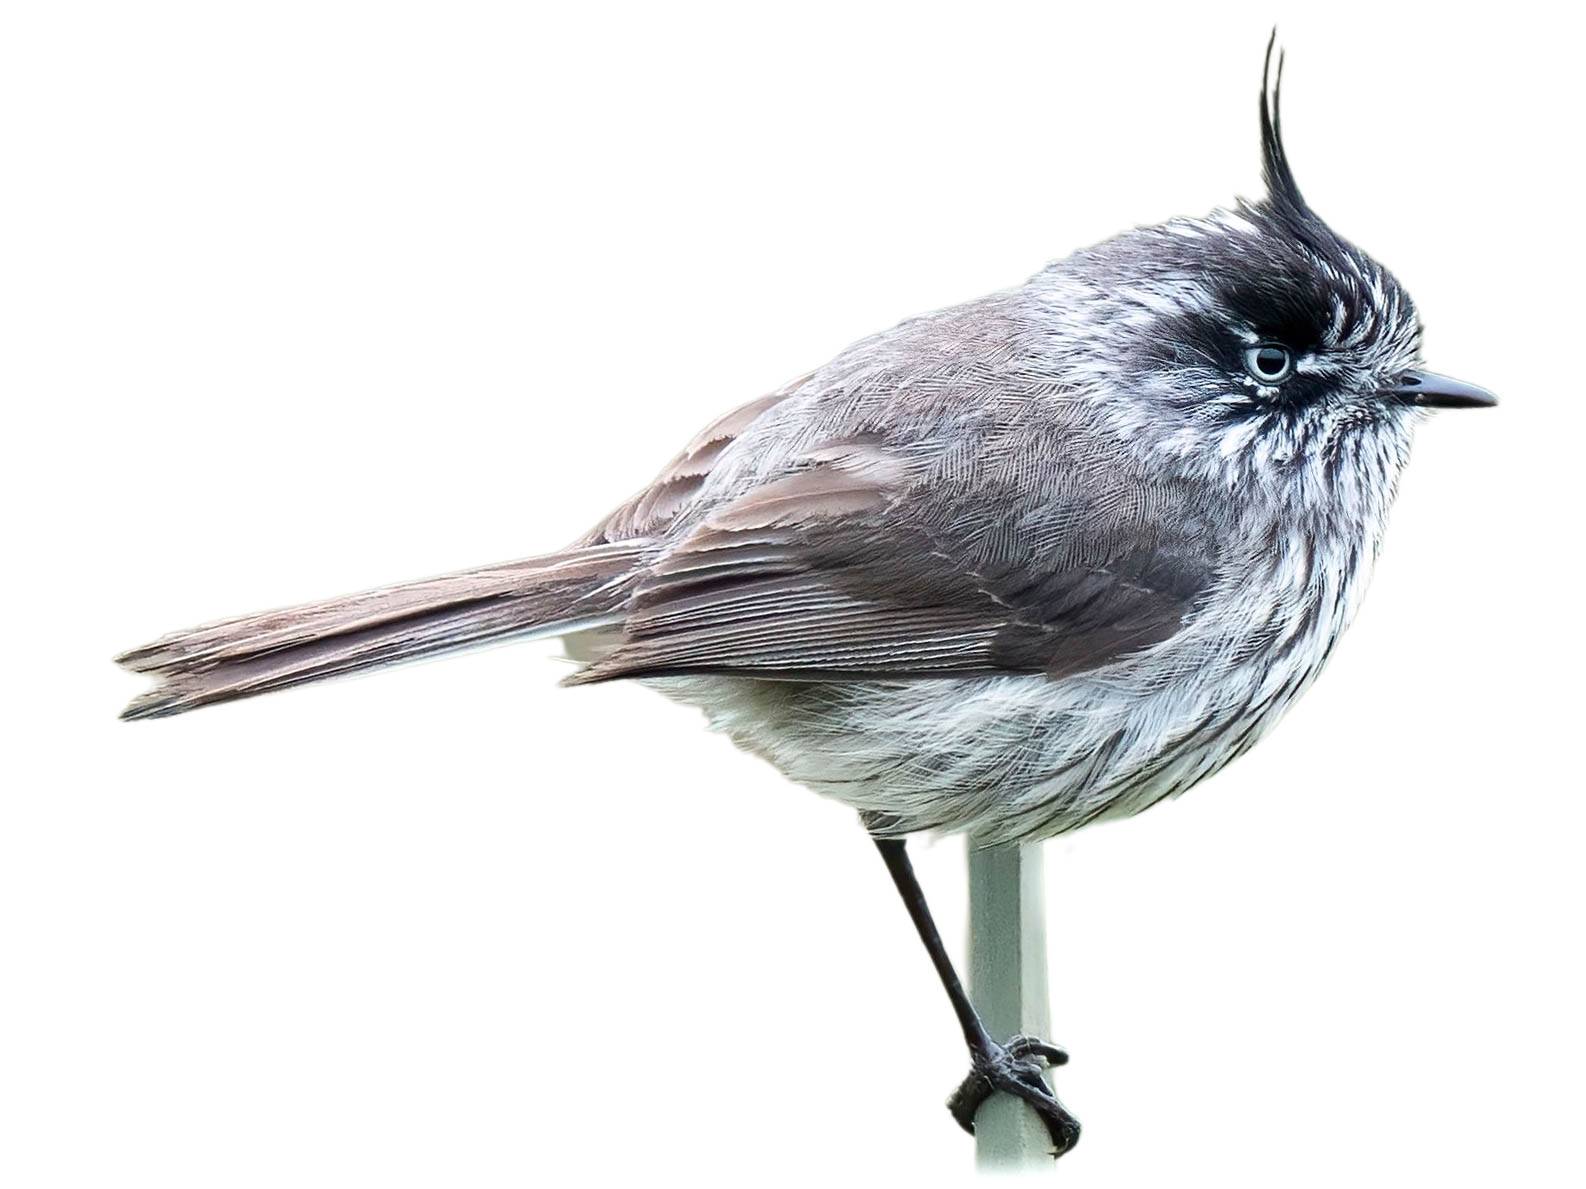 A photo of a Tufted Tit-Tyrant (Anairetes parulus)